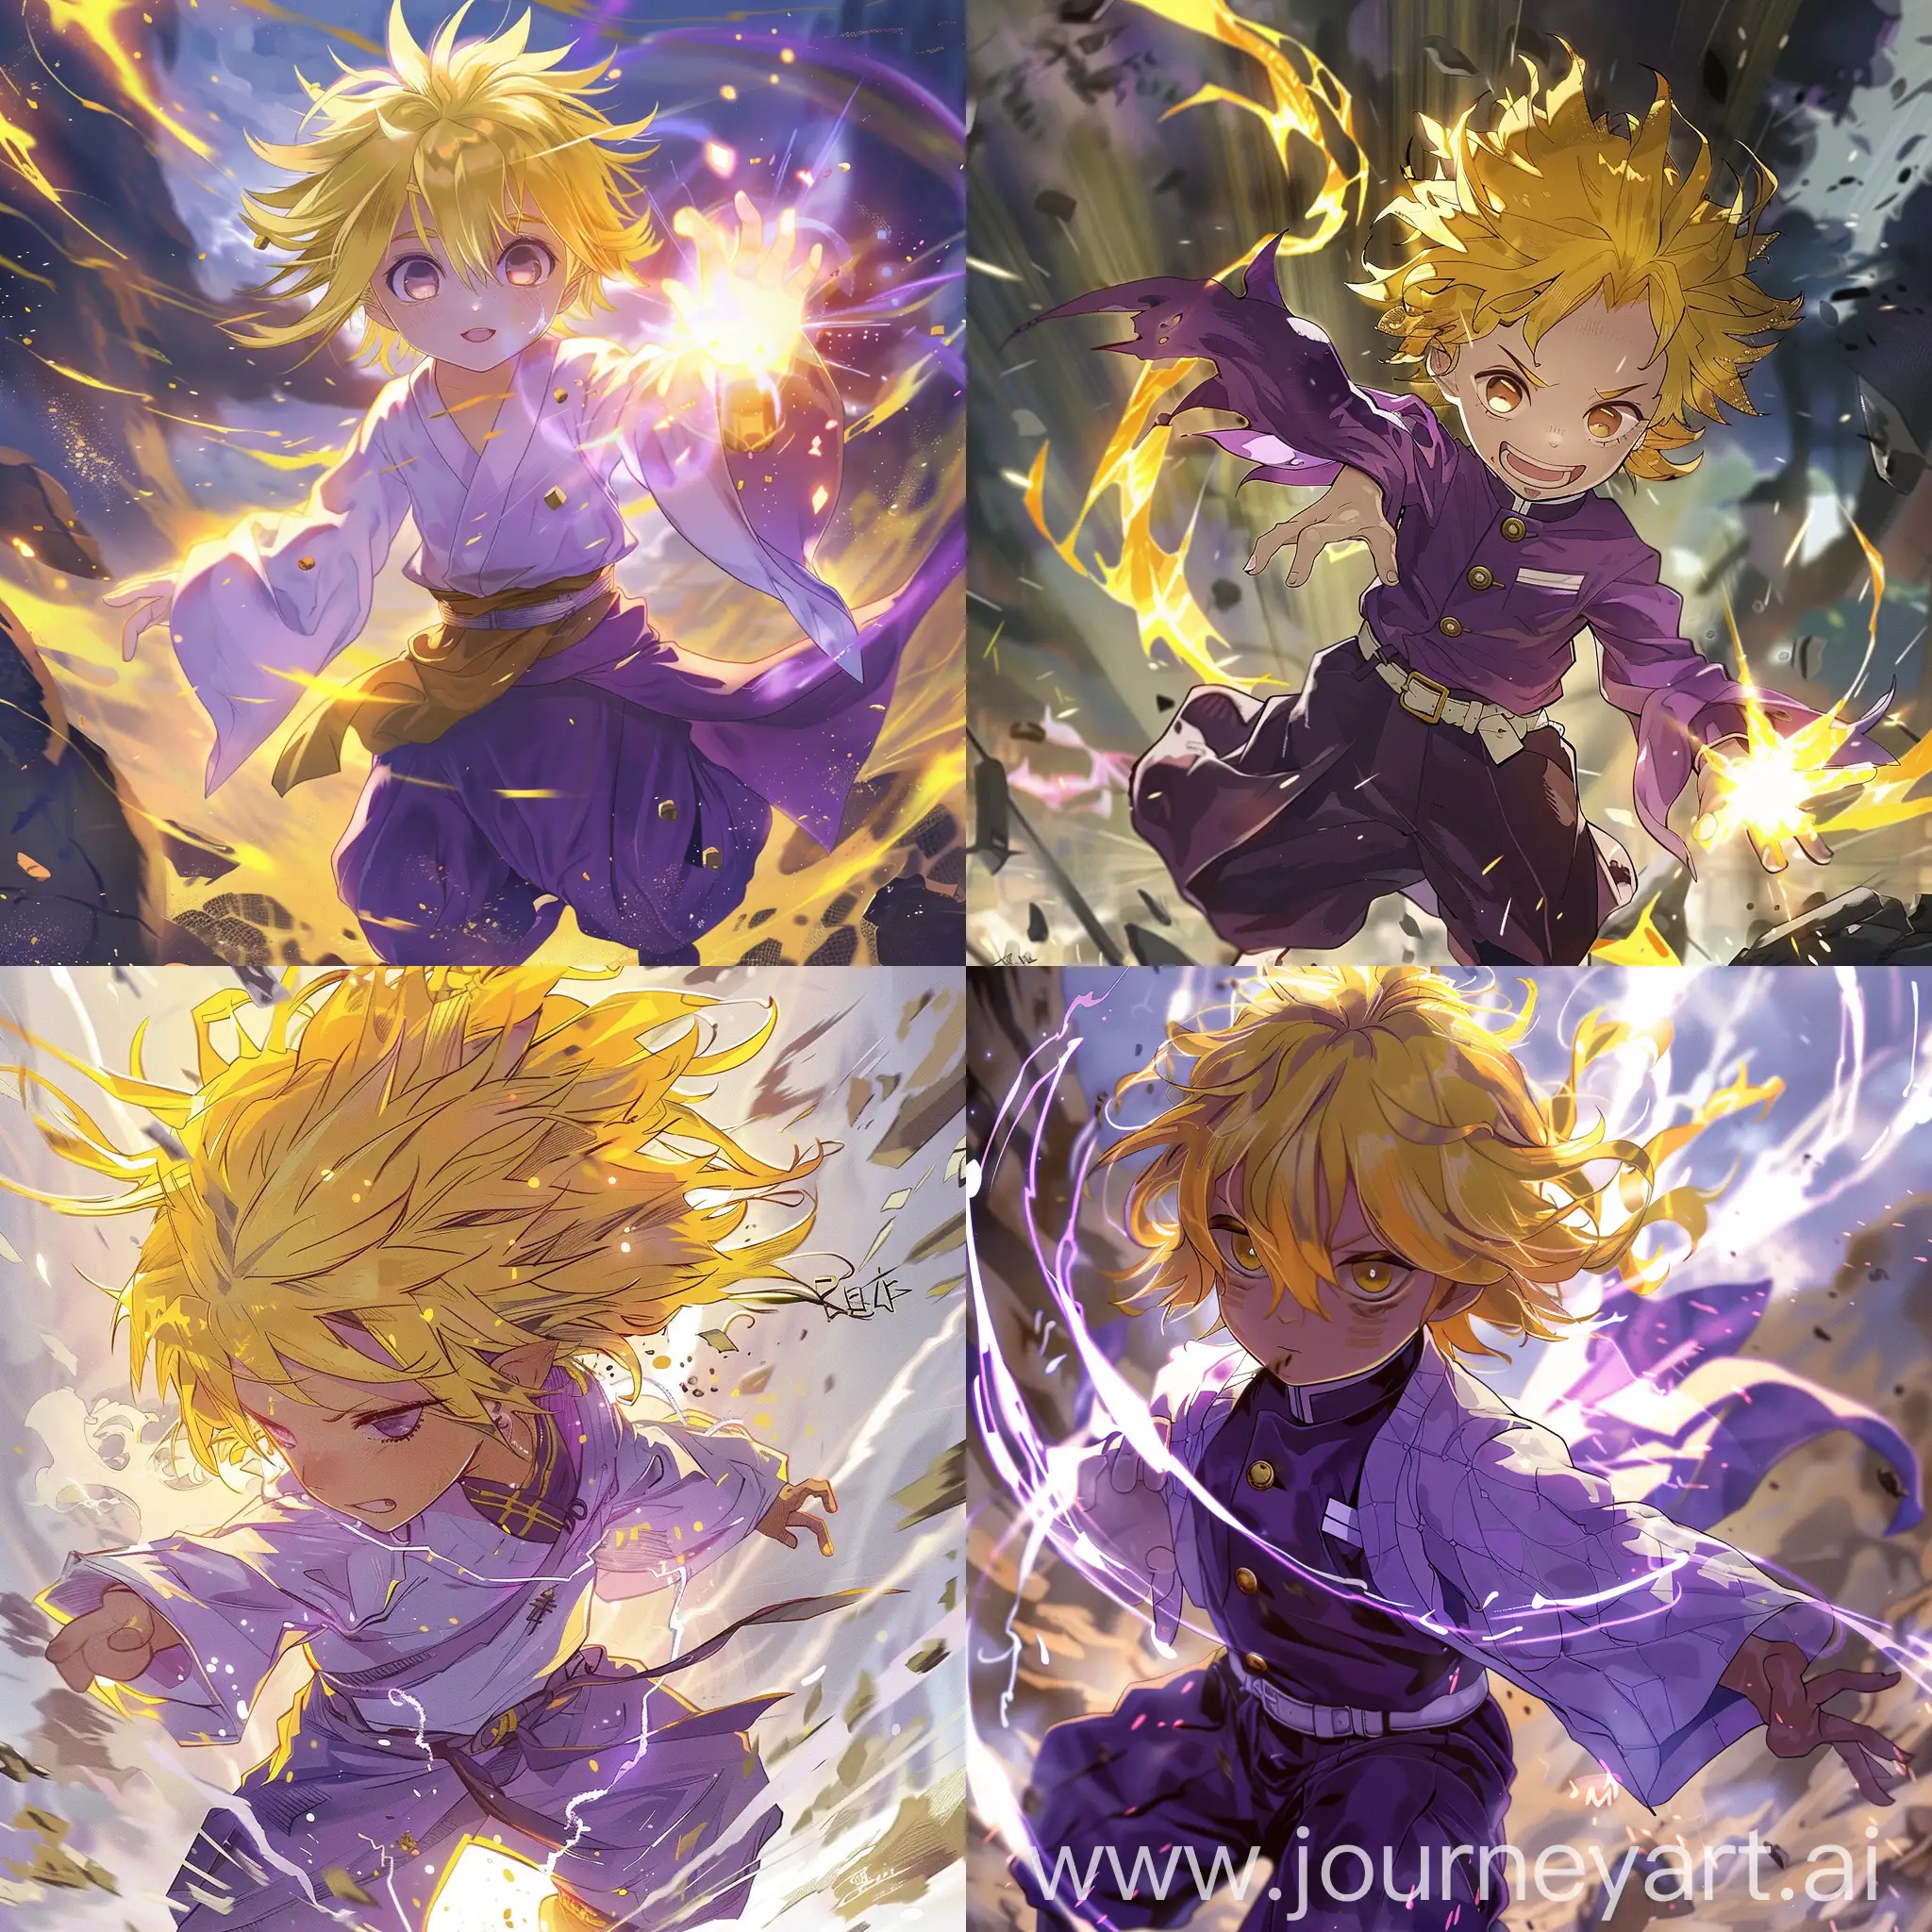 Anime-Style-Powerful-Transformation-Light-Child-with-Yellow-Hair-and-Purple-Clothes